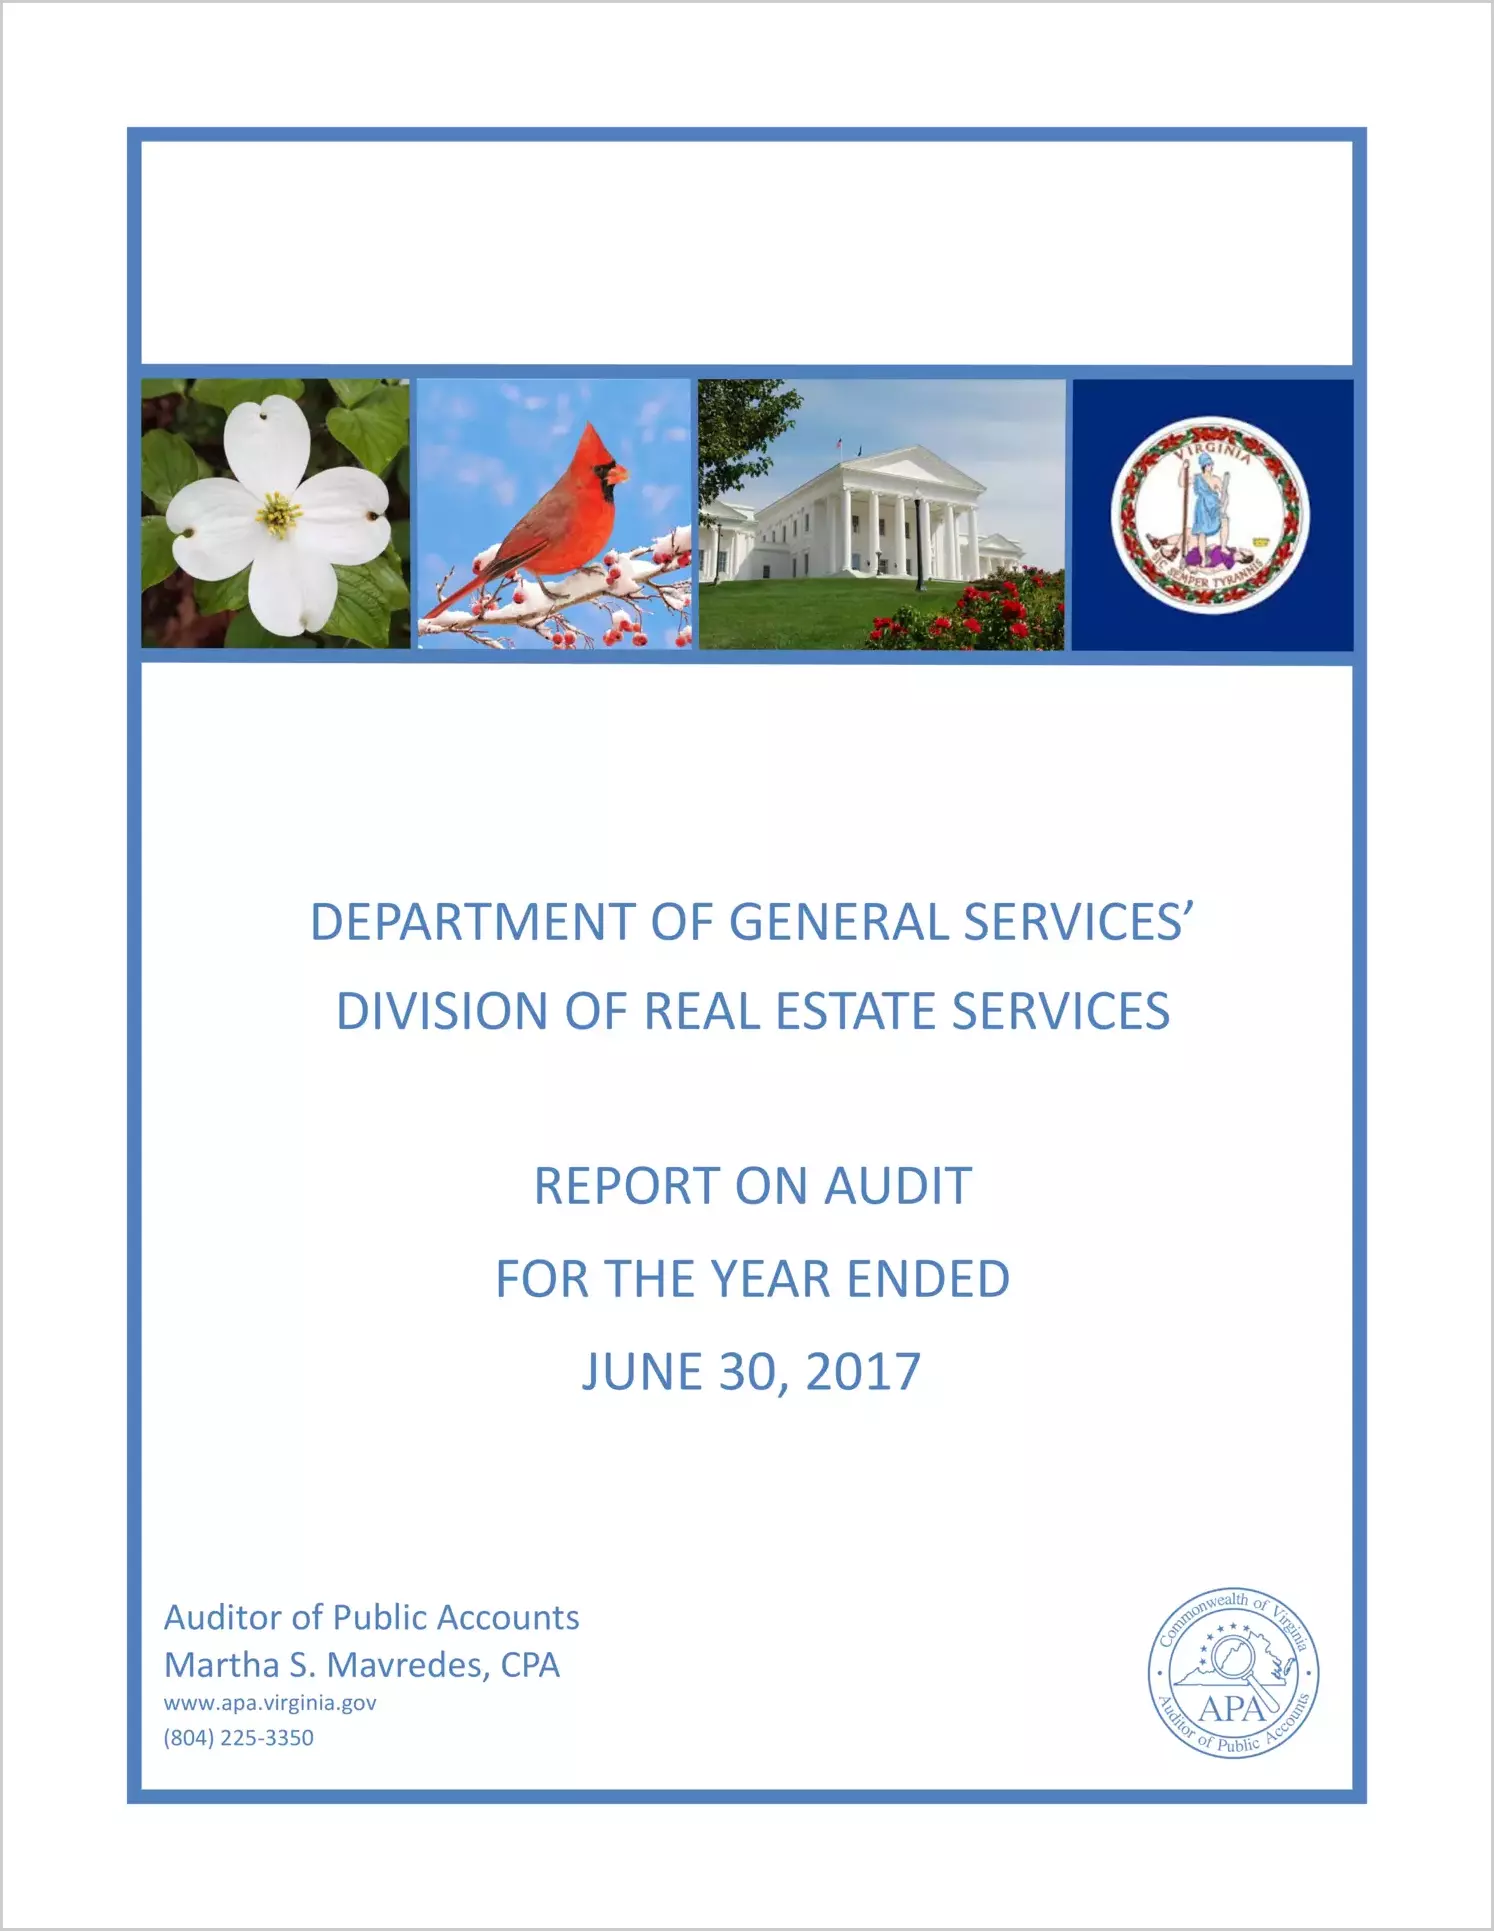 Department of General ServicesODivision of Real Estate Services for the fiscal year ended June 30, 2017